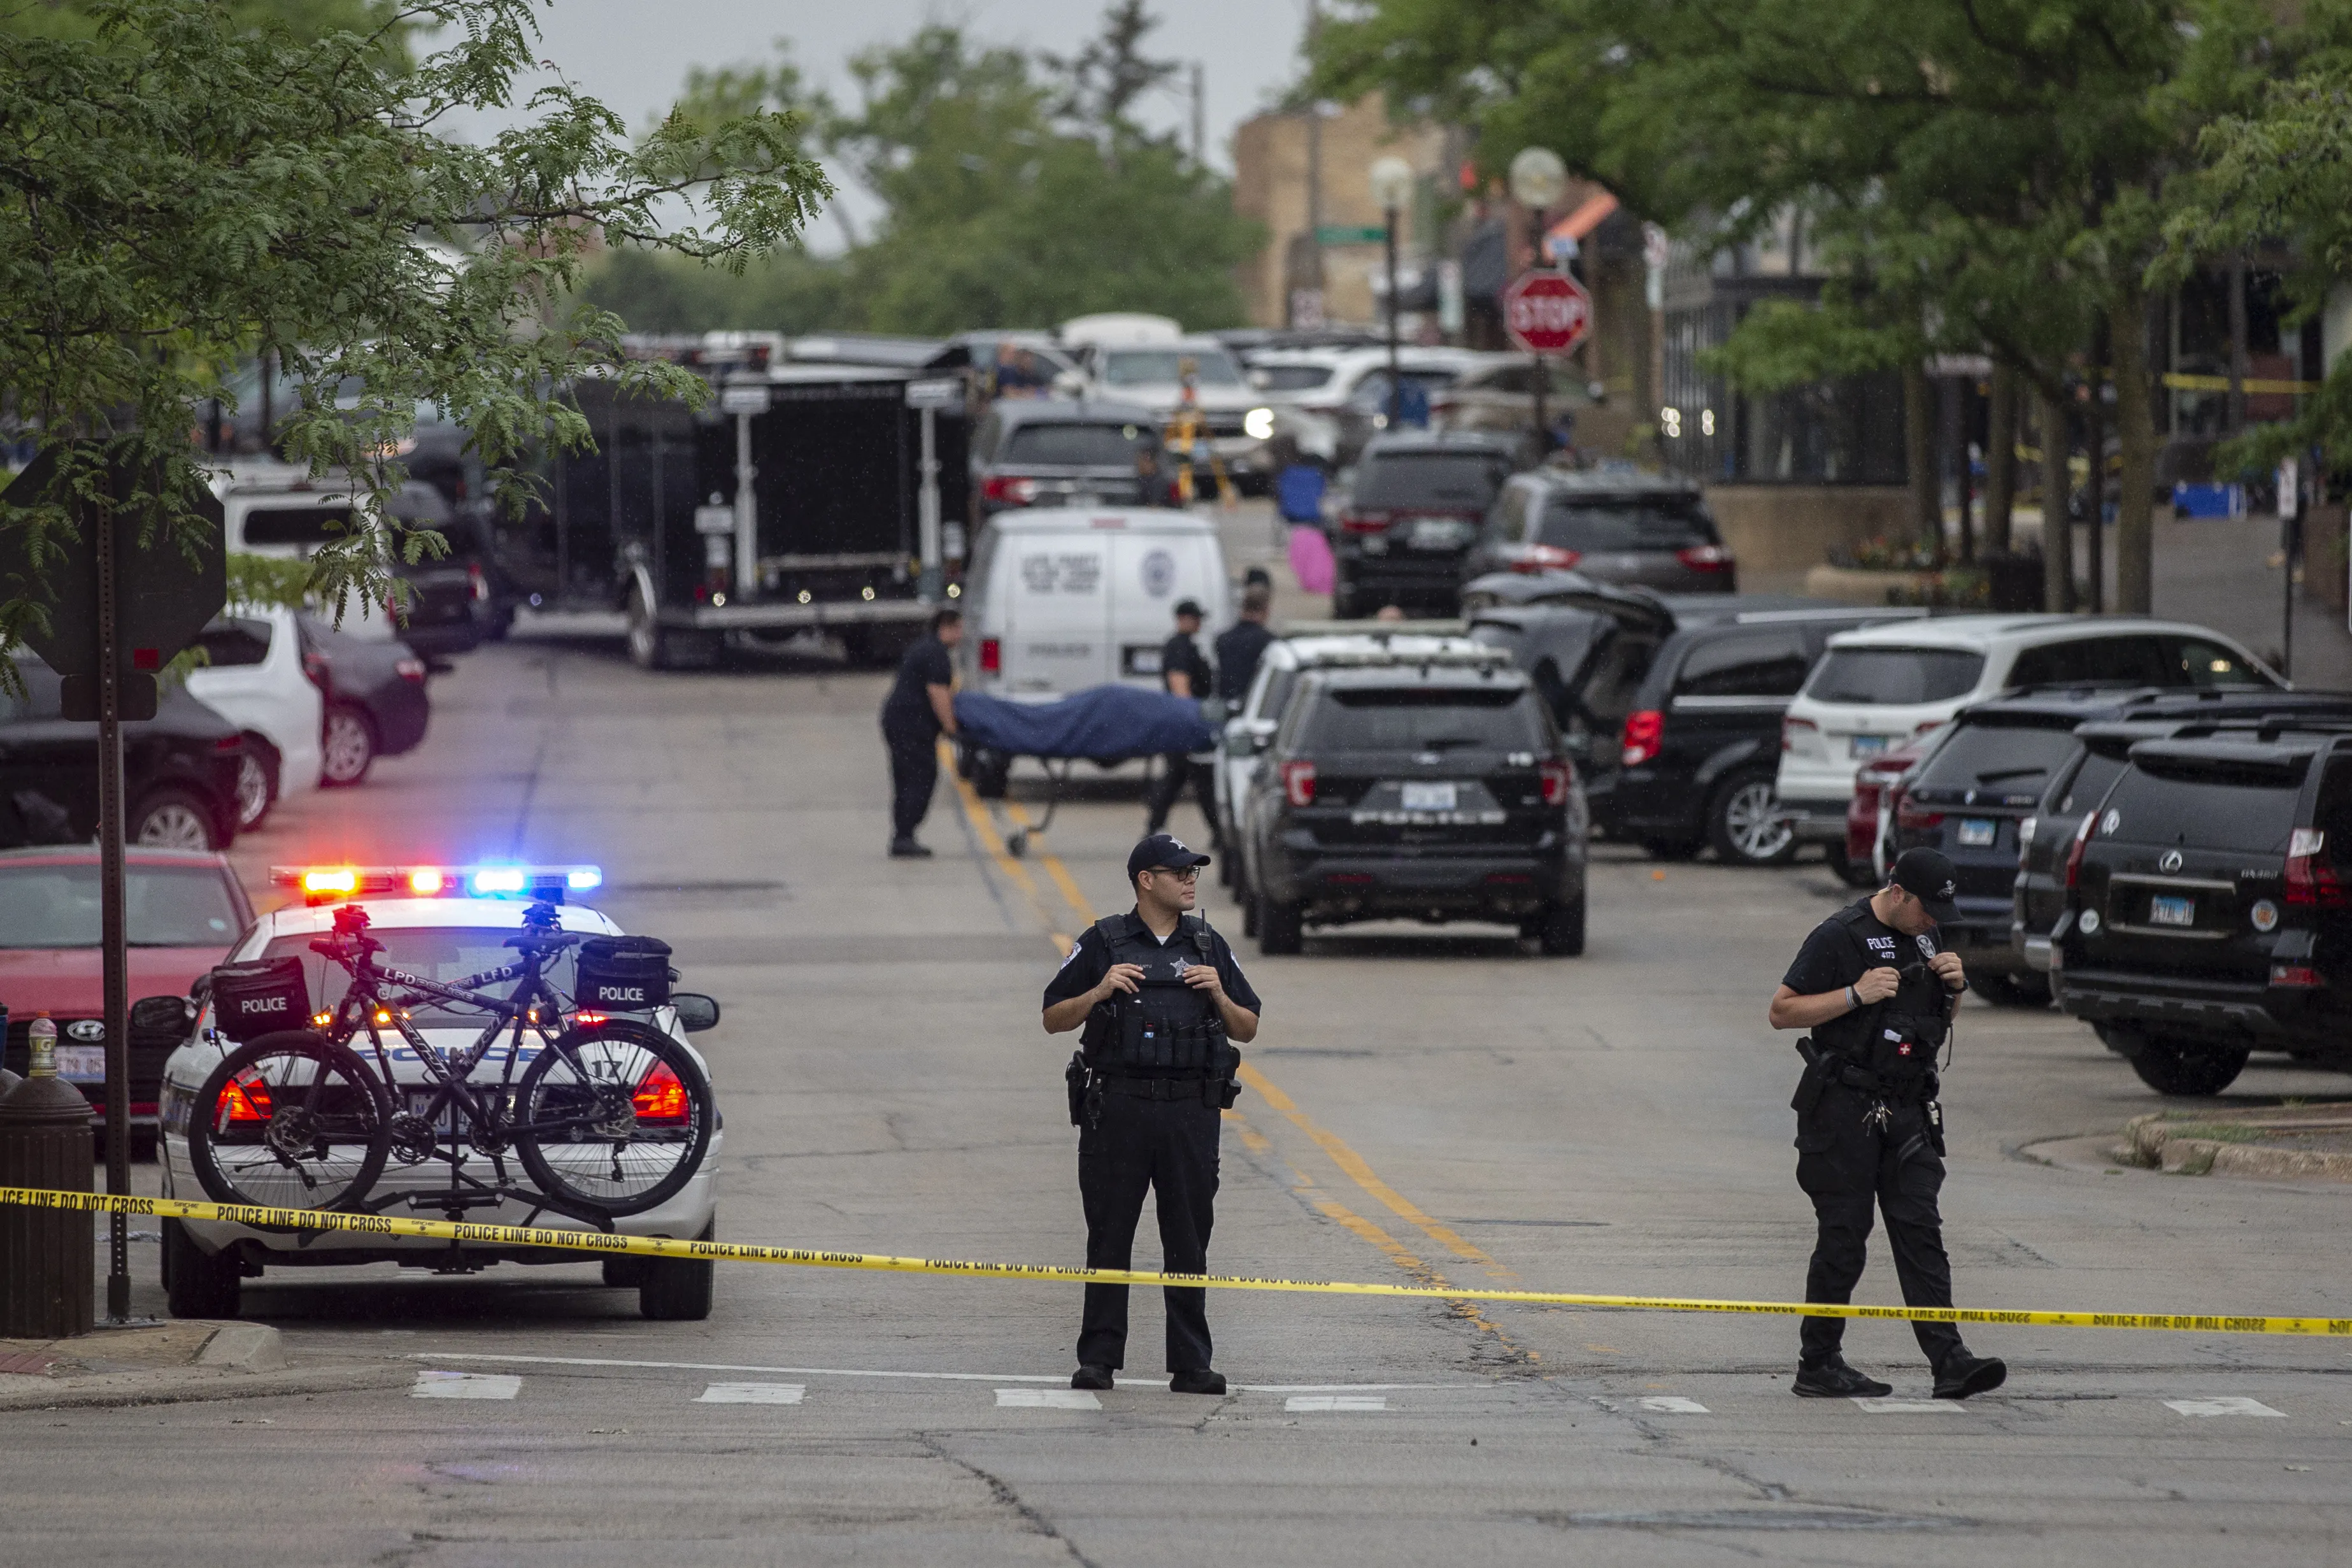 First responders take away victims from the scene of a mass shooting at a Fourth of July parade on July 4, 2022 in Highland Park, Illinois. At least six people were killed and 19 injured, according to published reports.?w=200&h=150